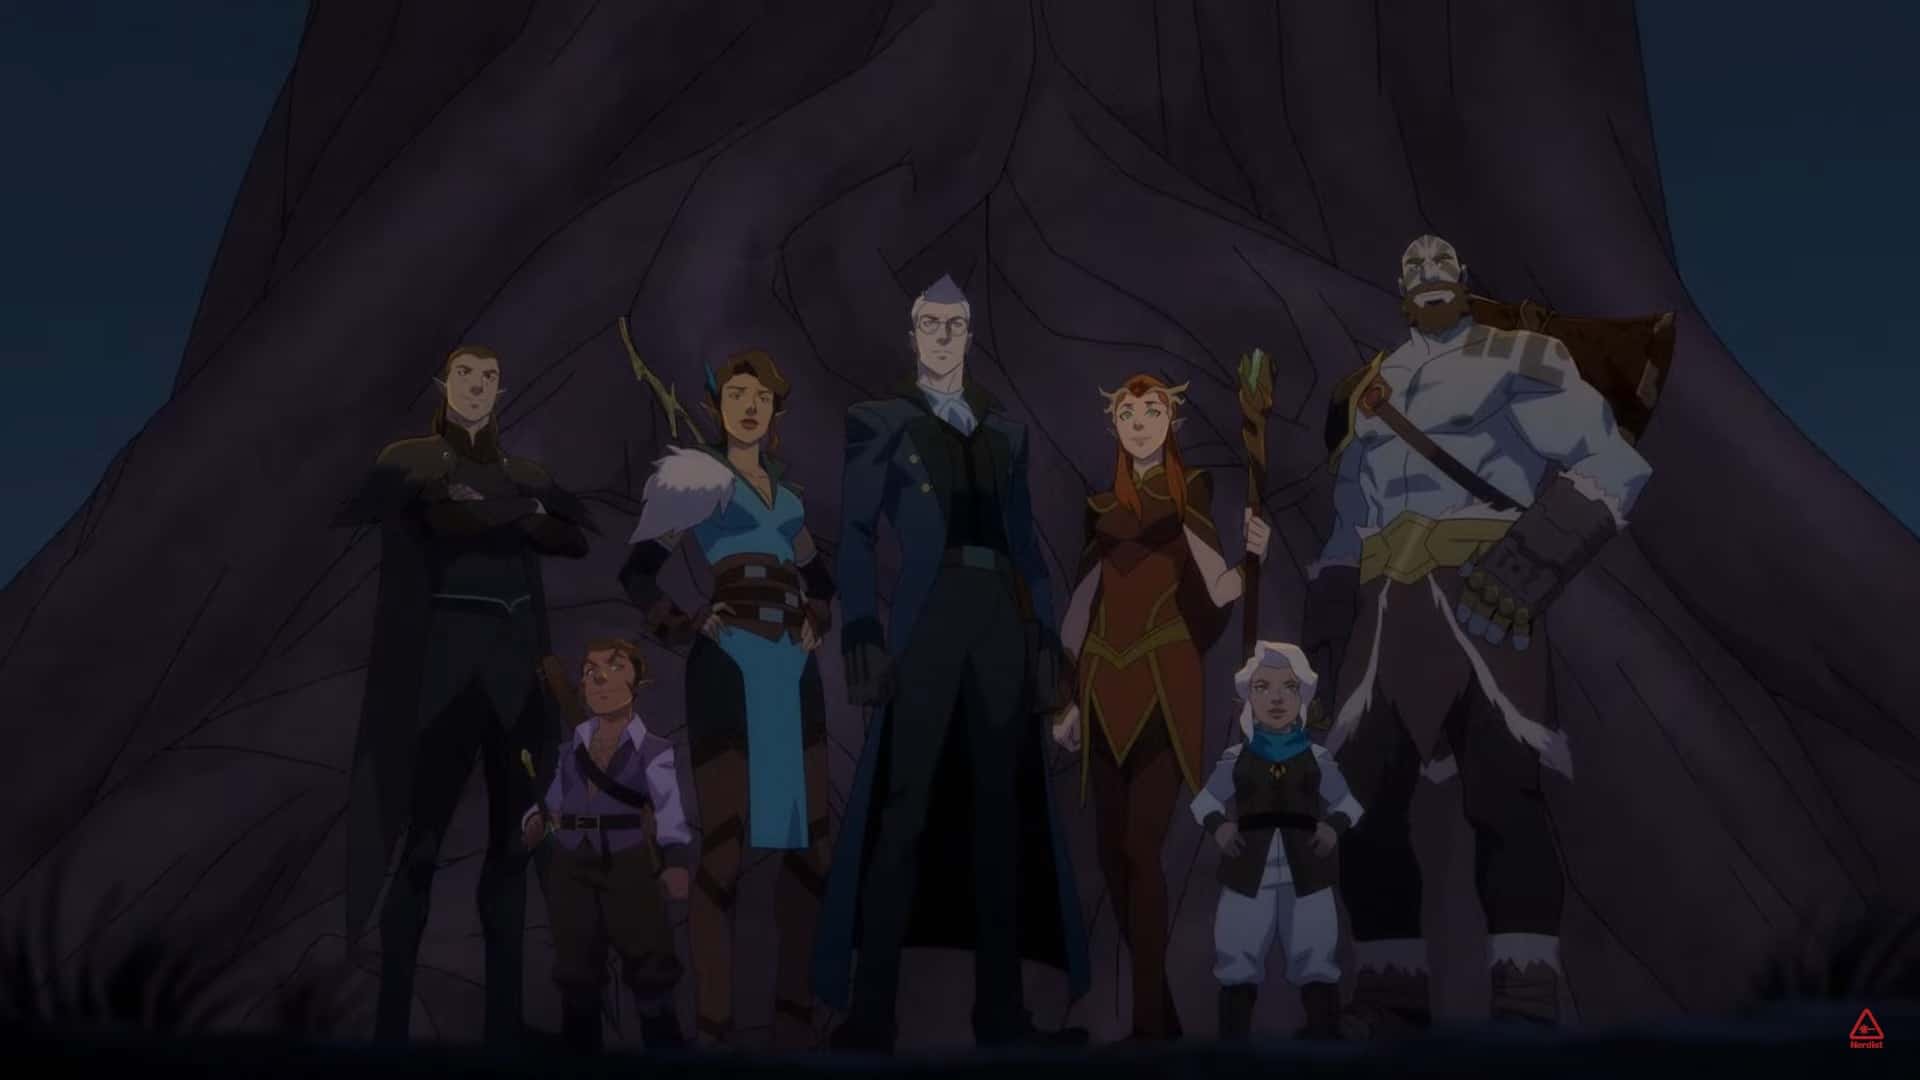 The Legend of Vox Machina Season 2 ends with an unexpected alliance